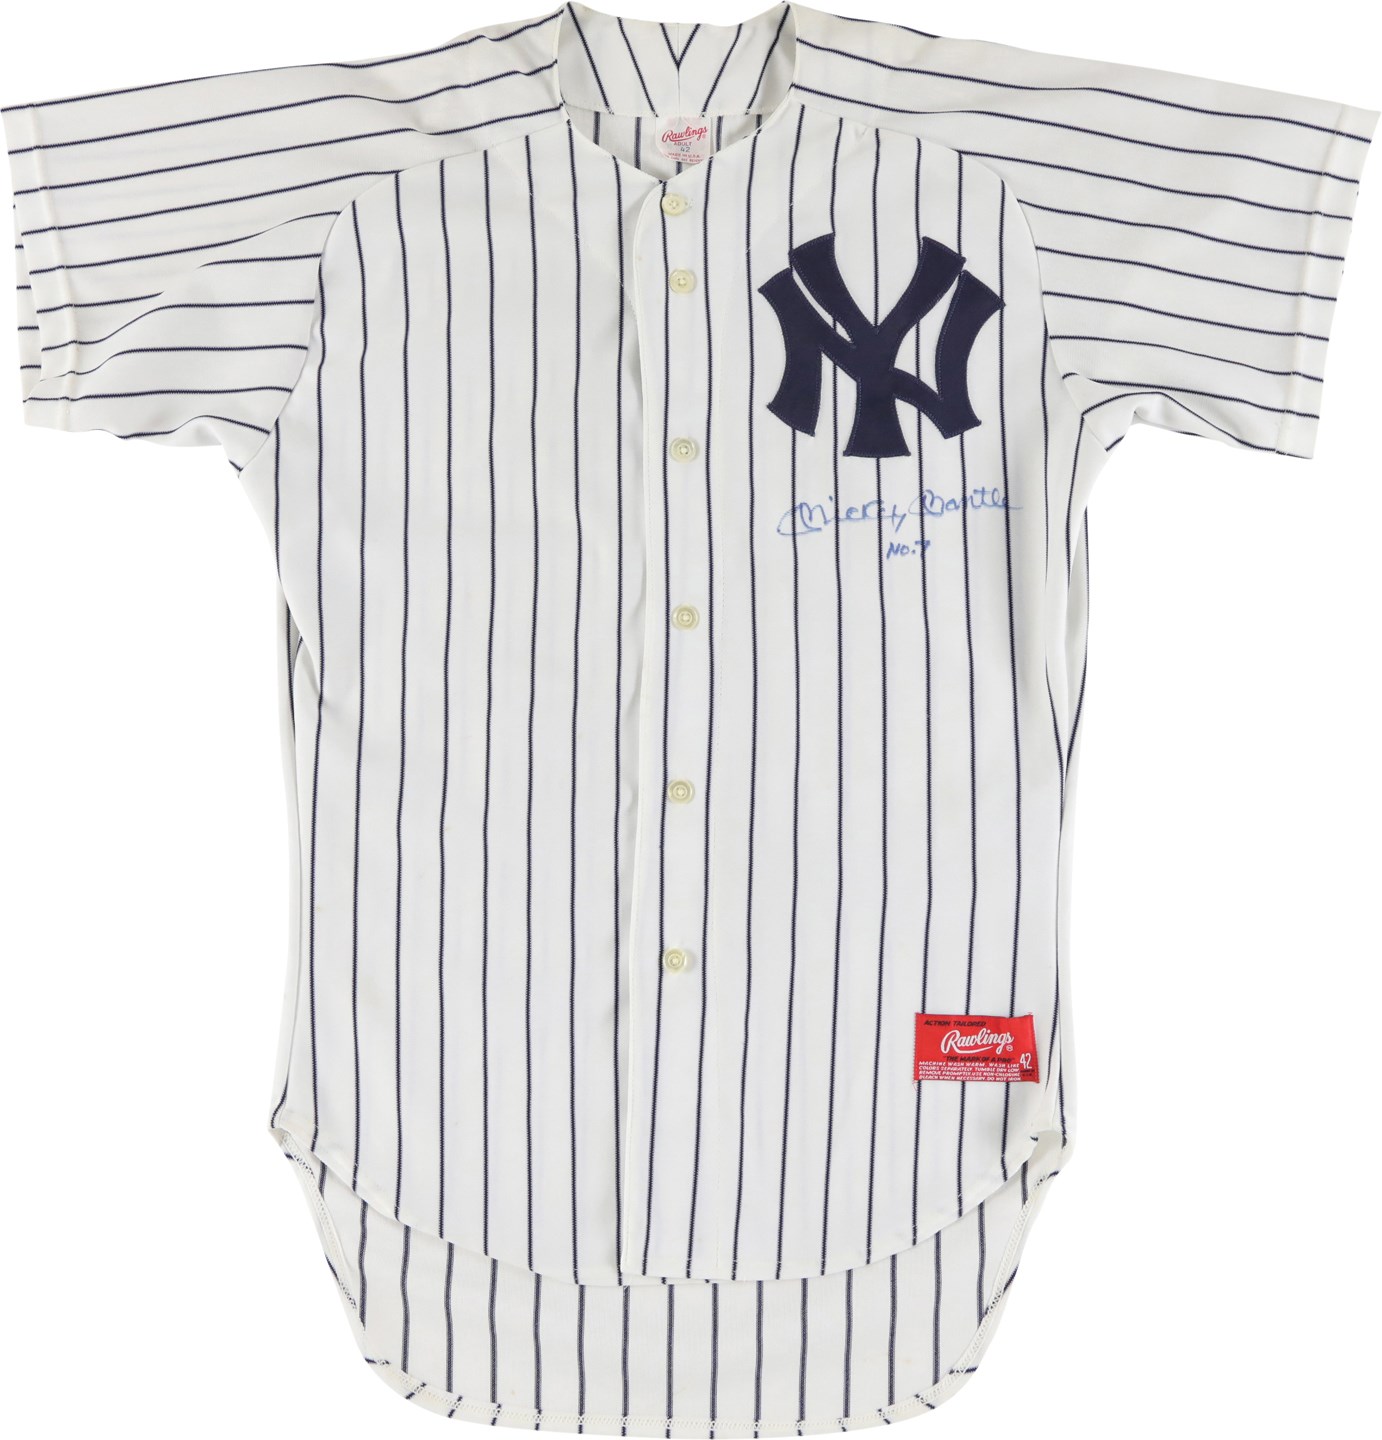 - Mickey Mantle Signed New York Yankees Jersey with No. 7 Inscription